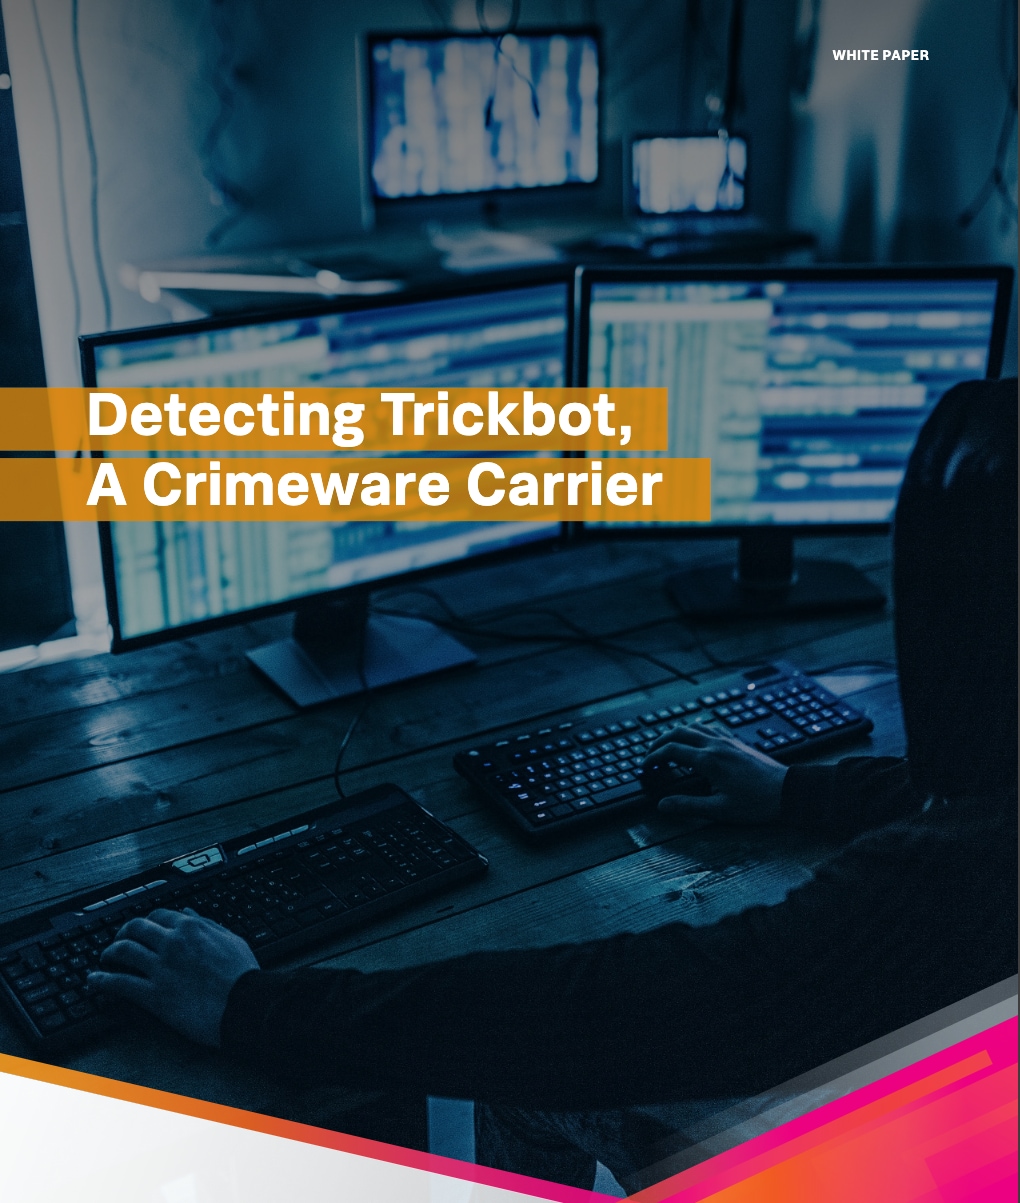 Detecting Trickbot Payloads